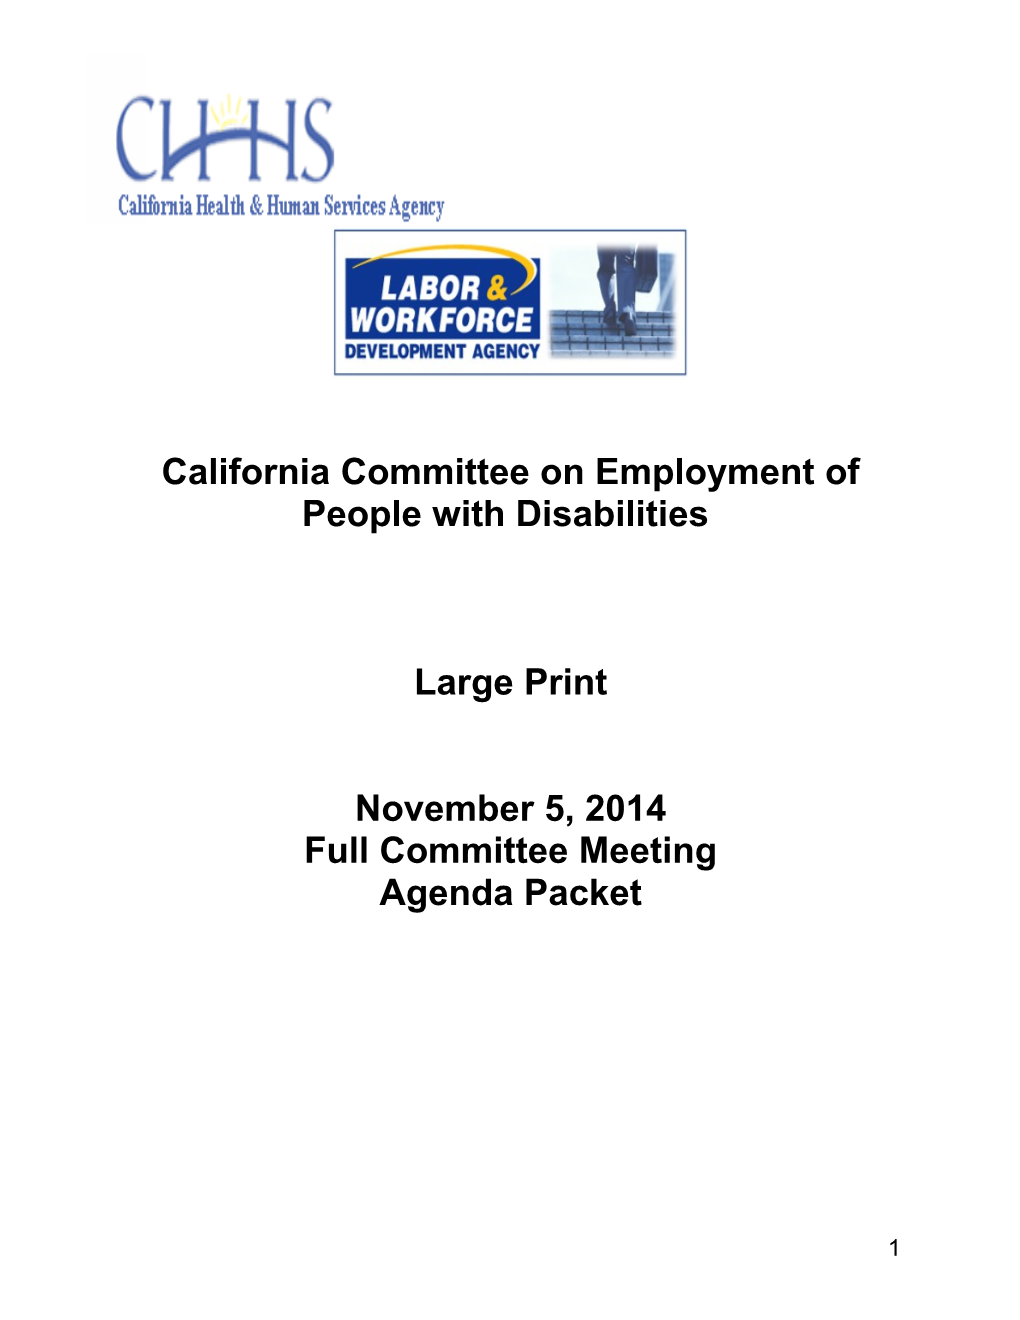 California Committee on Employment of People with Disabilities